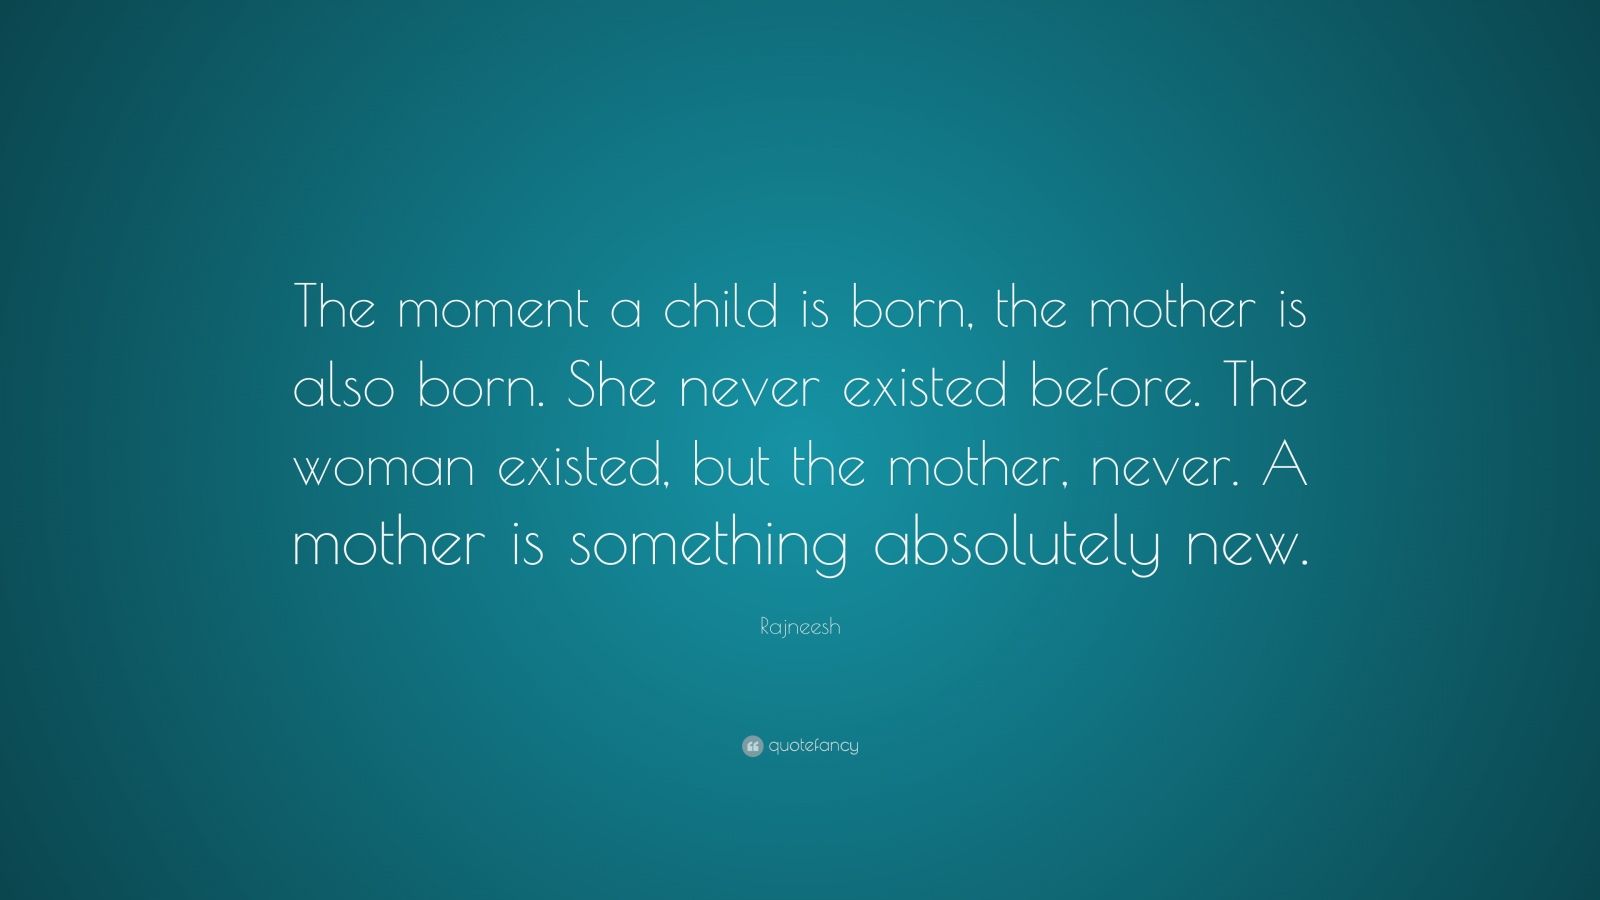 Rajneesh Quote: “The moment a child is born, the mother is also born ...